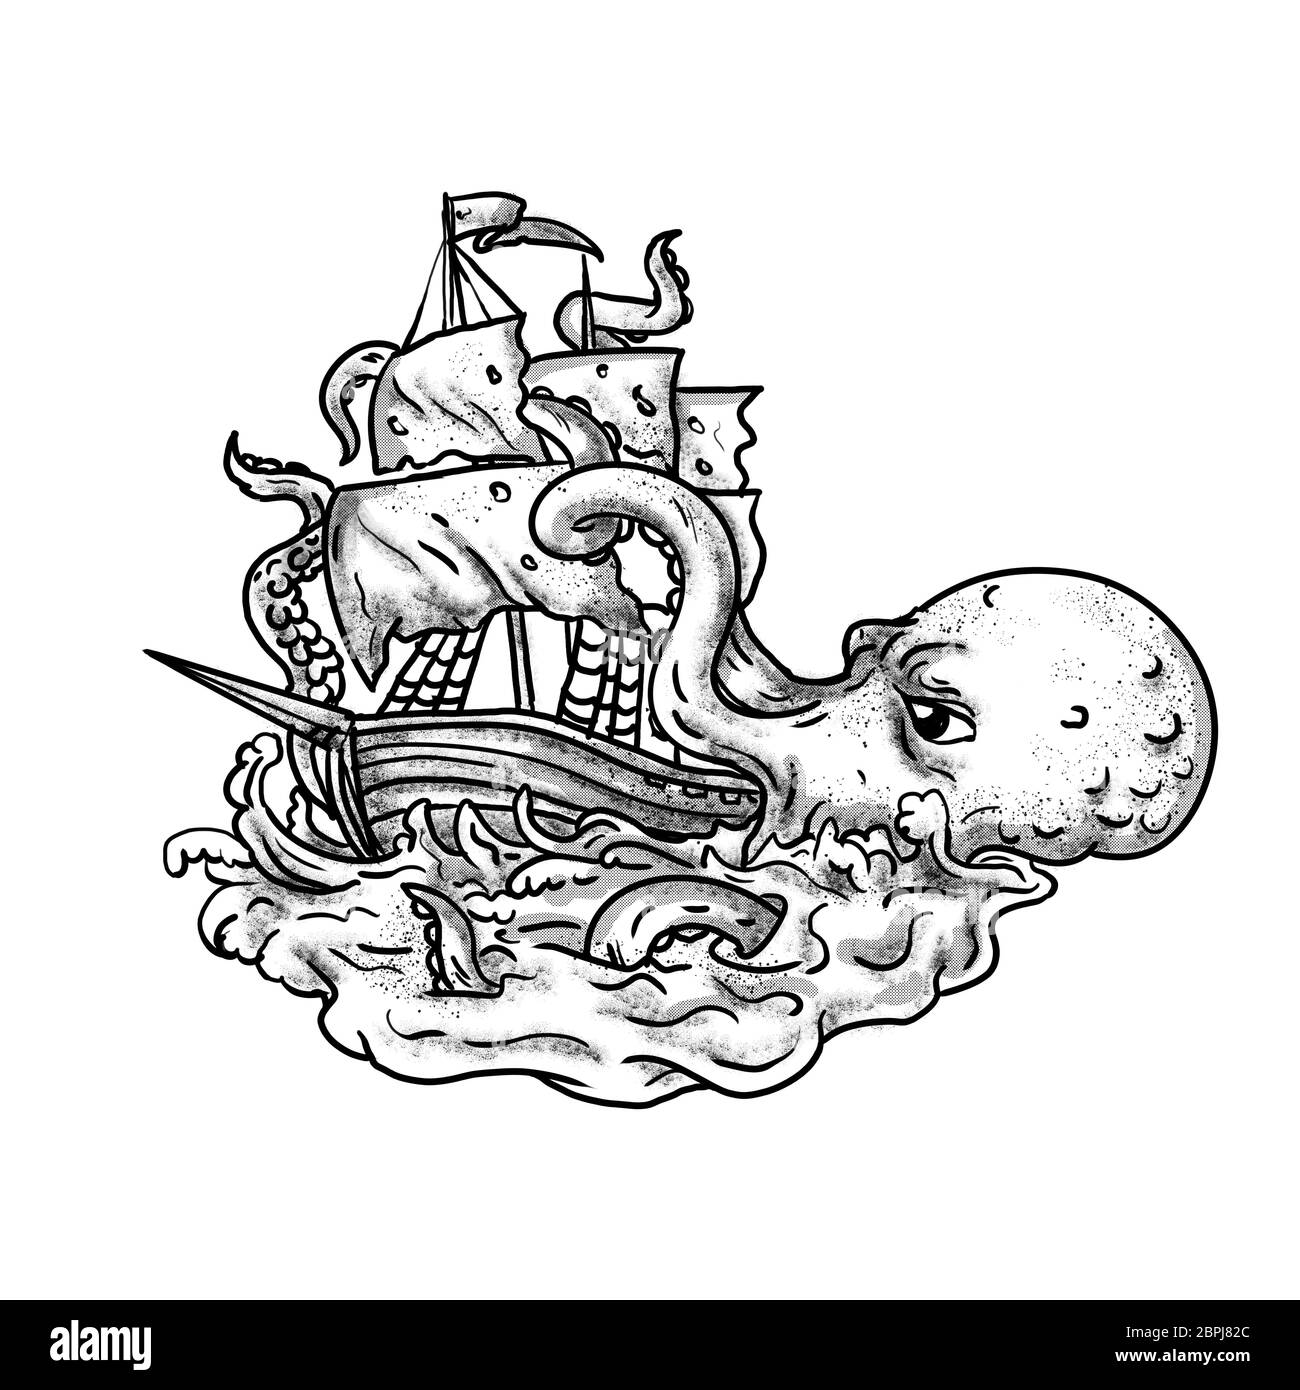 Tattoo style illustration of a kraken, a legendary cephalopod-like giant sea monster attacking a sailing ship with its tentacles on sea with tumultuou Stock Photo